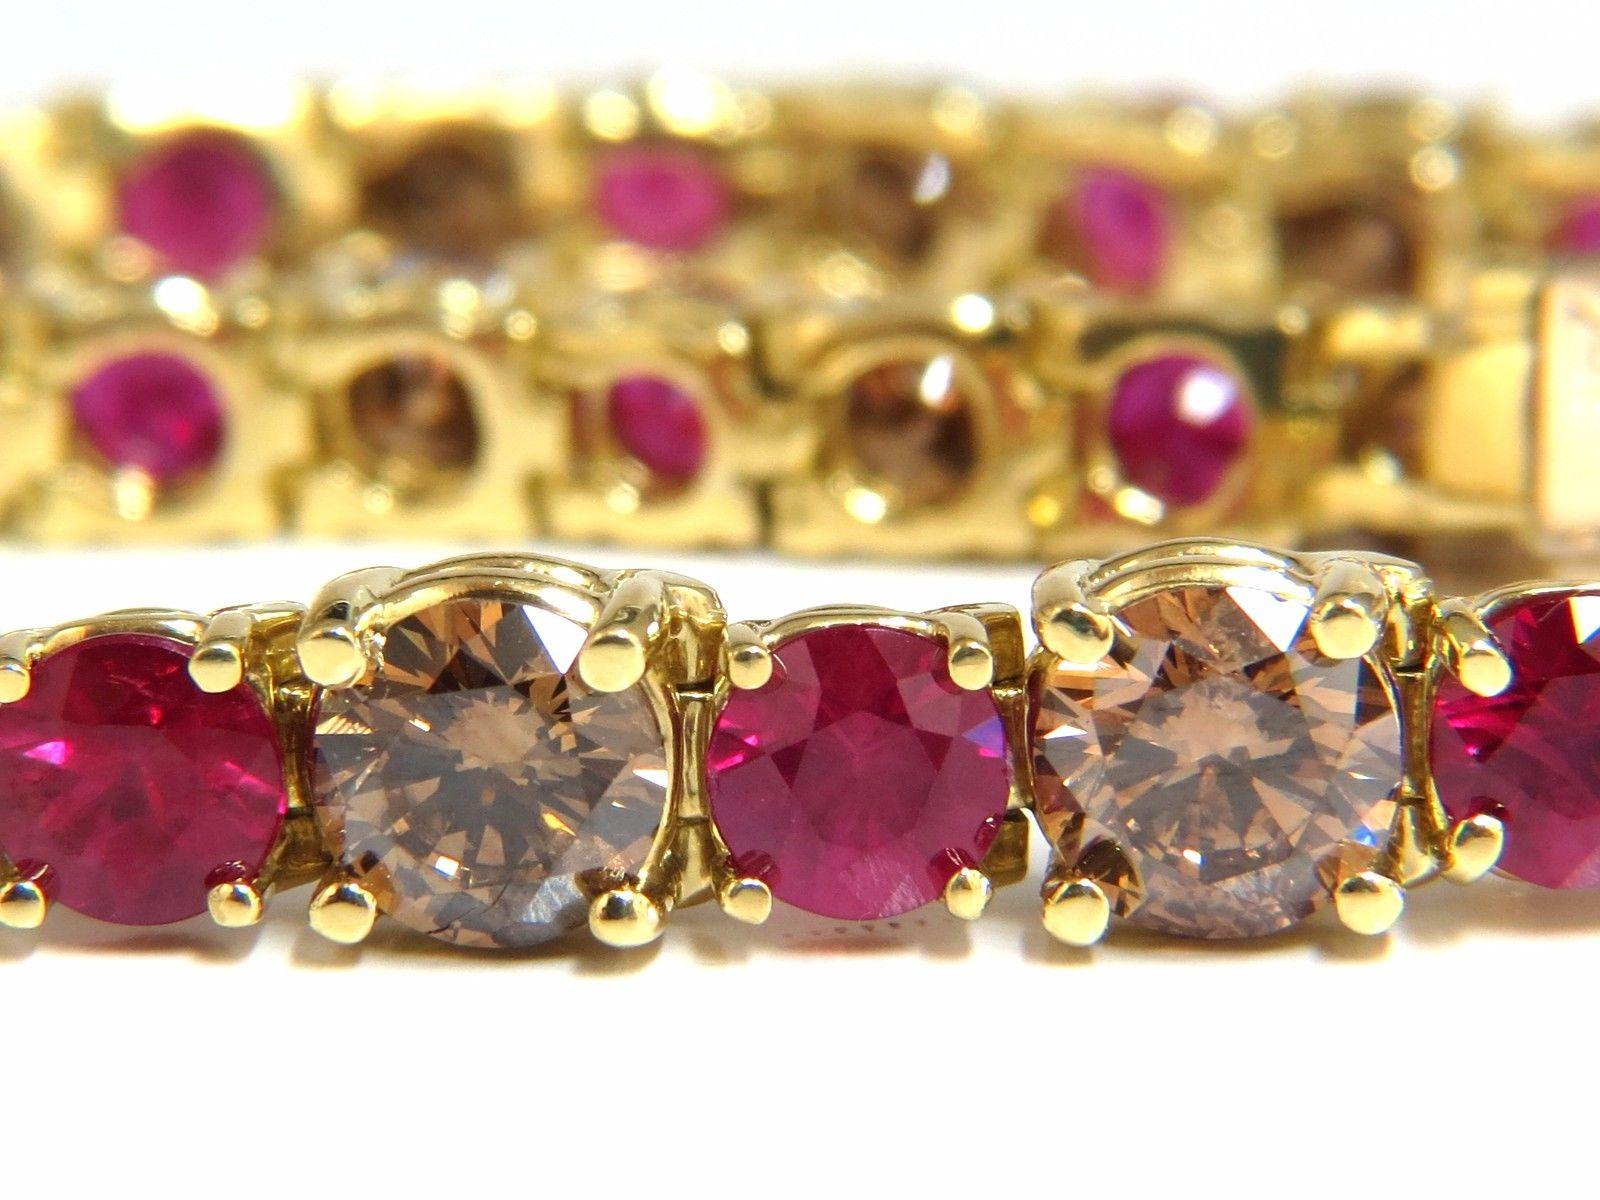 10.43ct. Natural Ruby bracelet.

Round cuts, Fully Faceted.

Vibrant Red, excellent Sparkle.

Clean Clarity & Transparent.

Graduating Diameters: 5.5 -4.8 mm 



13.71ct. natural fancy color brown diamonds:

Rounds, Full Cut

Vs-2